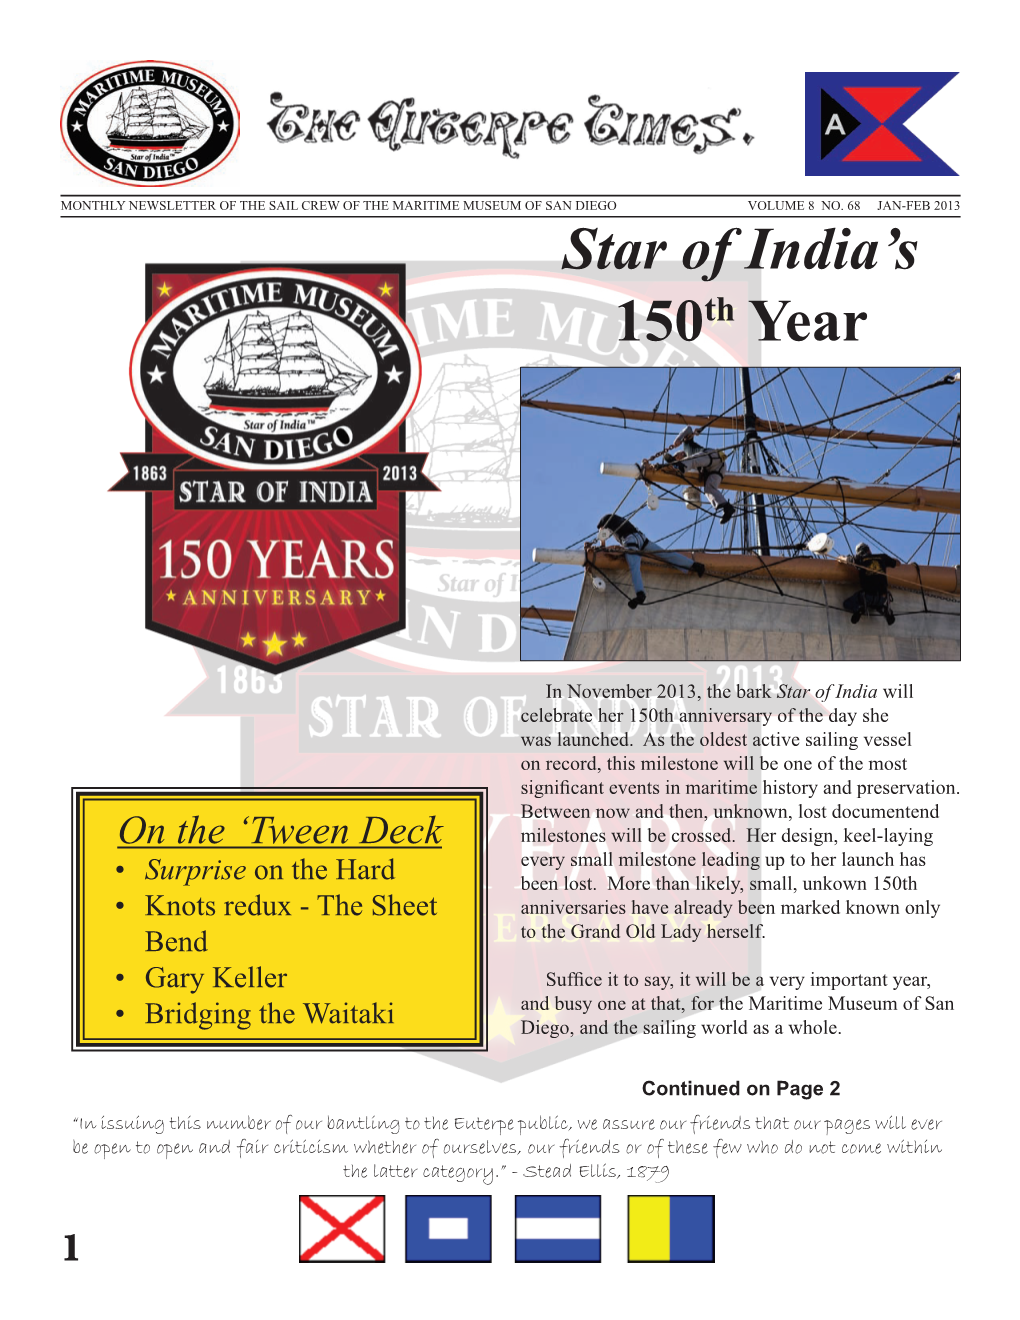 Star of India's 150Th Year